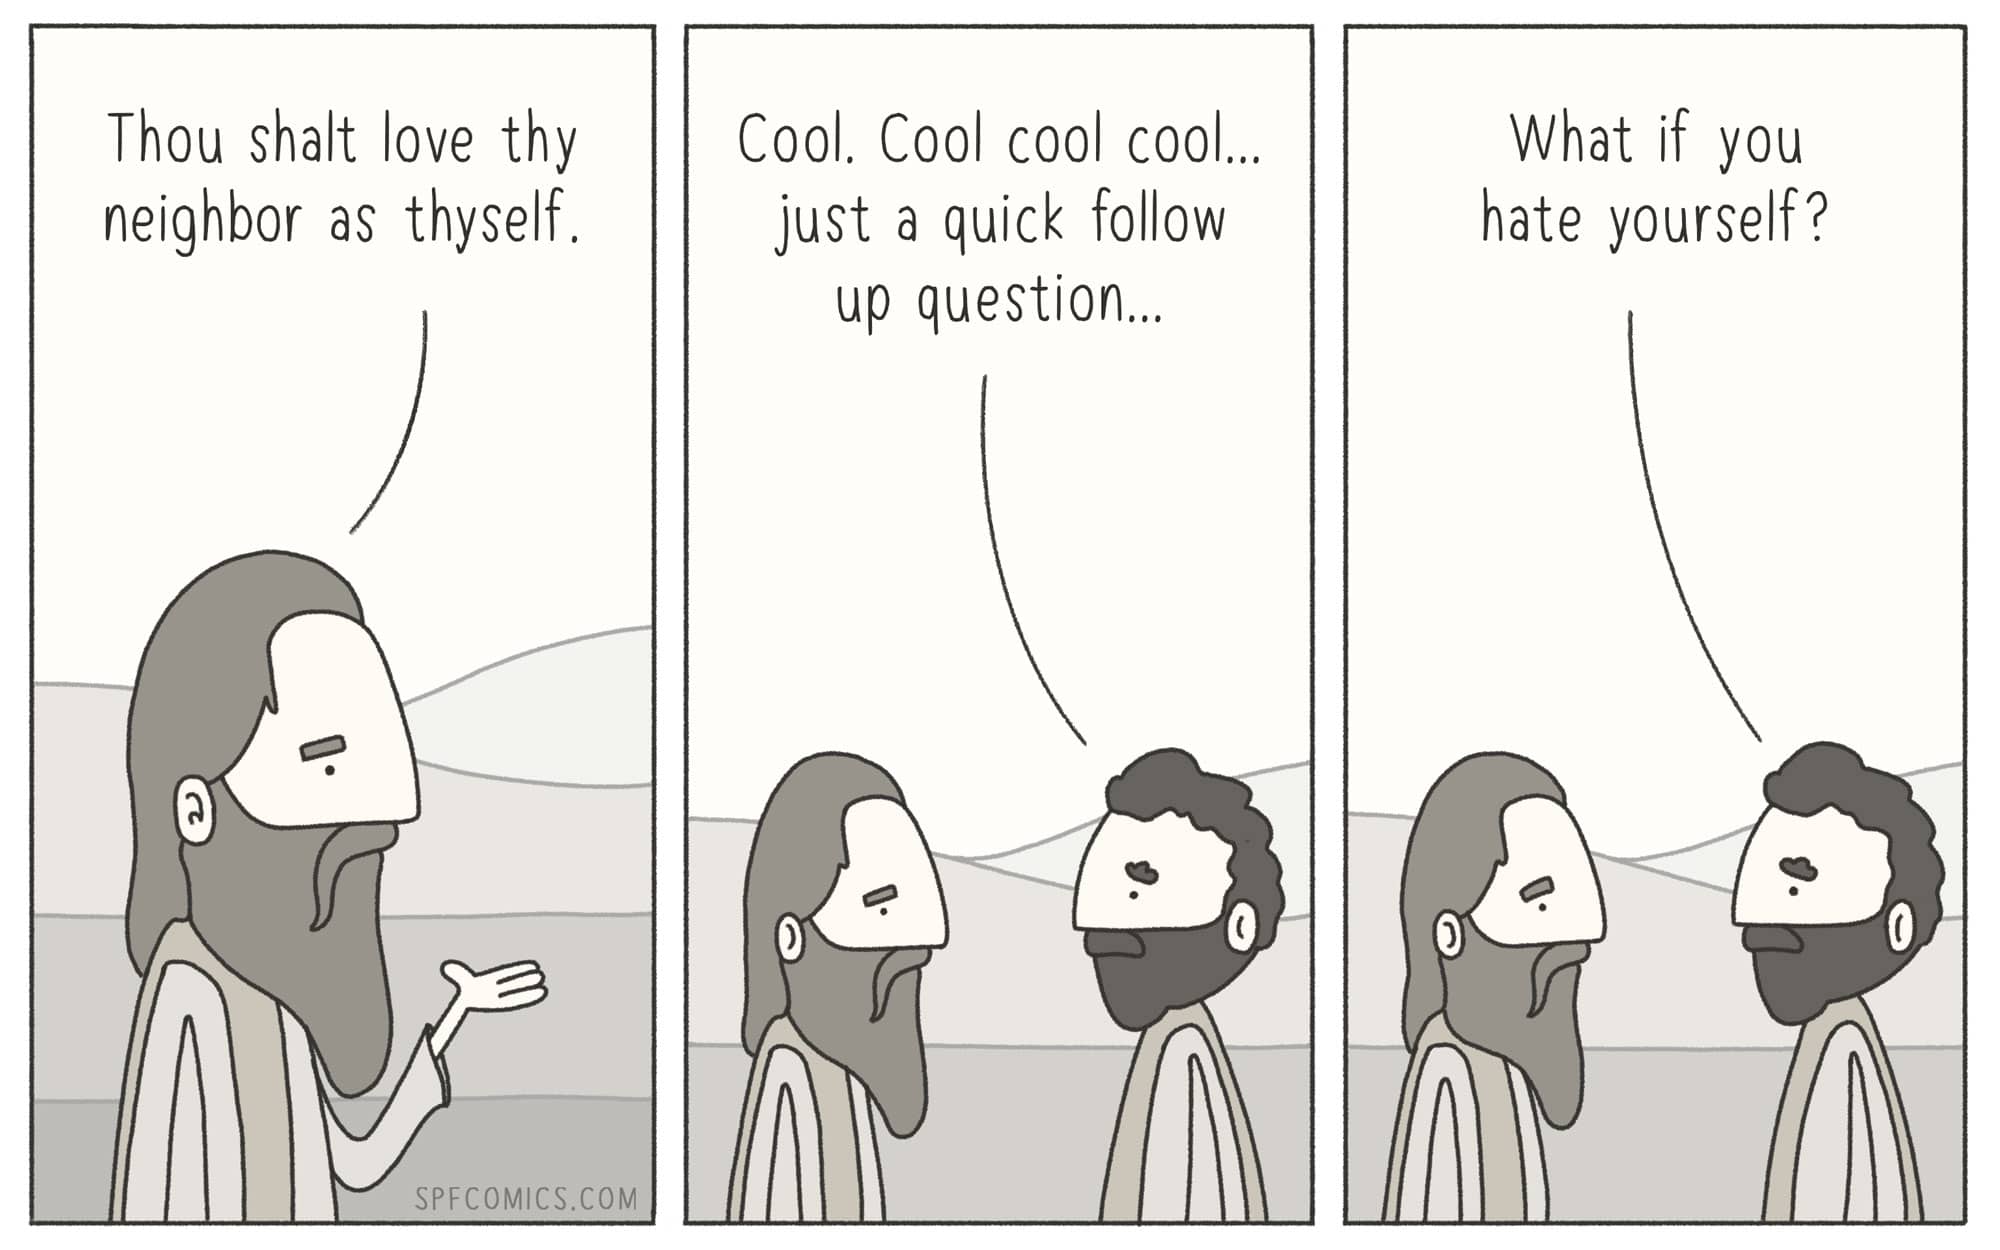 christian christian-memes christian text: Thou shalt love thy neighbor as thyself. SPFCOMICS.COM Cool. Cool cool cool... just a quick follow up question... What if you hate yourself? 